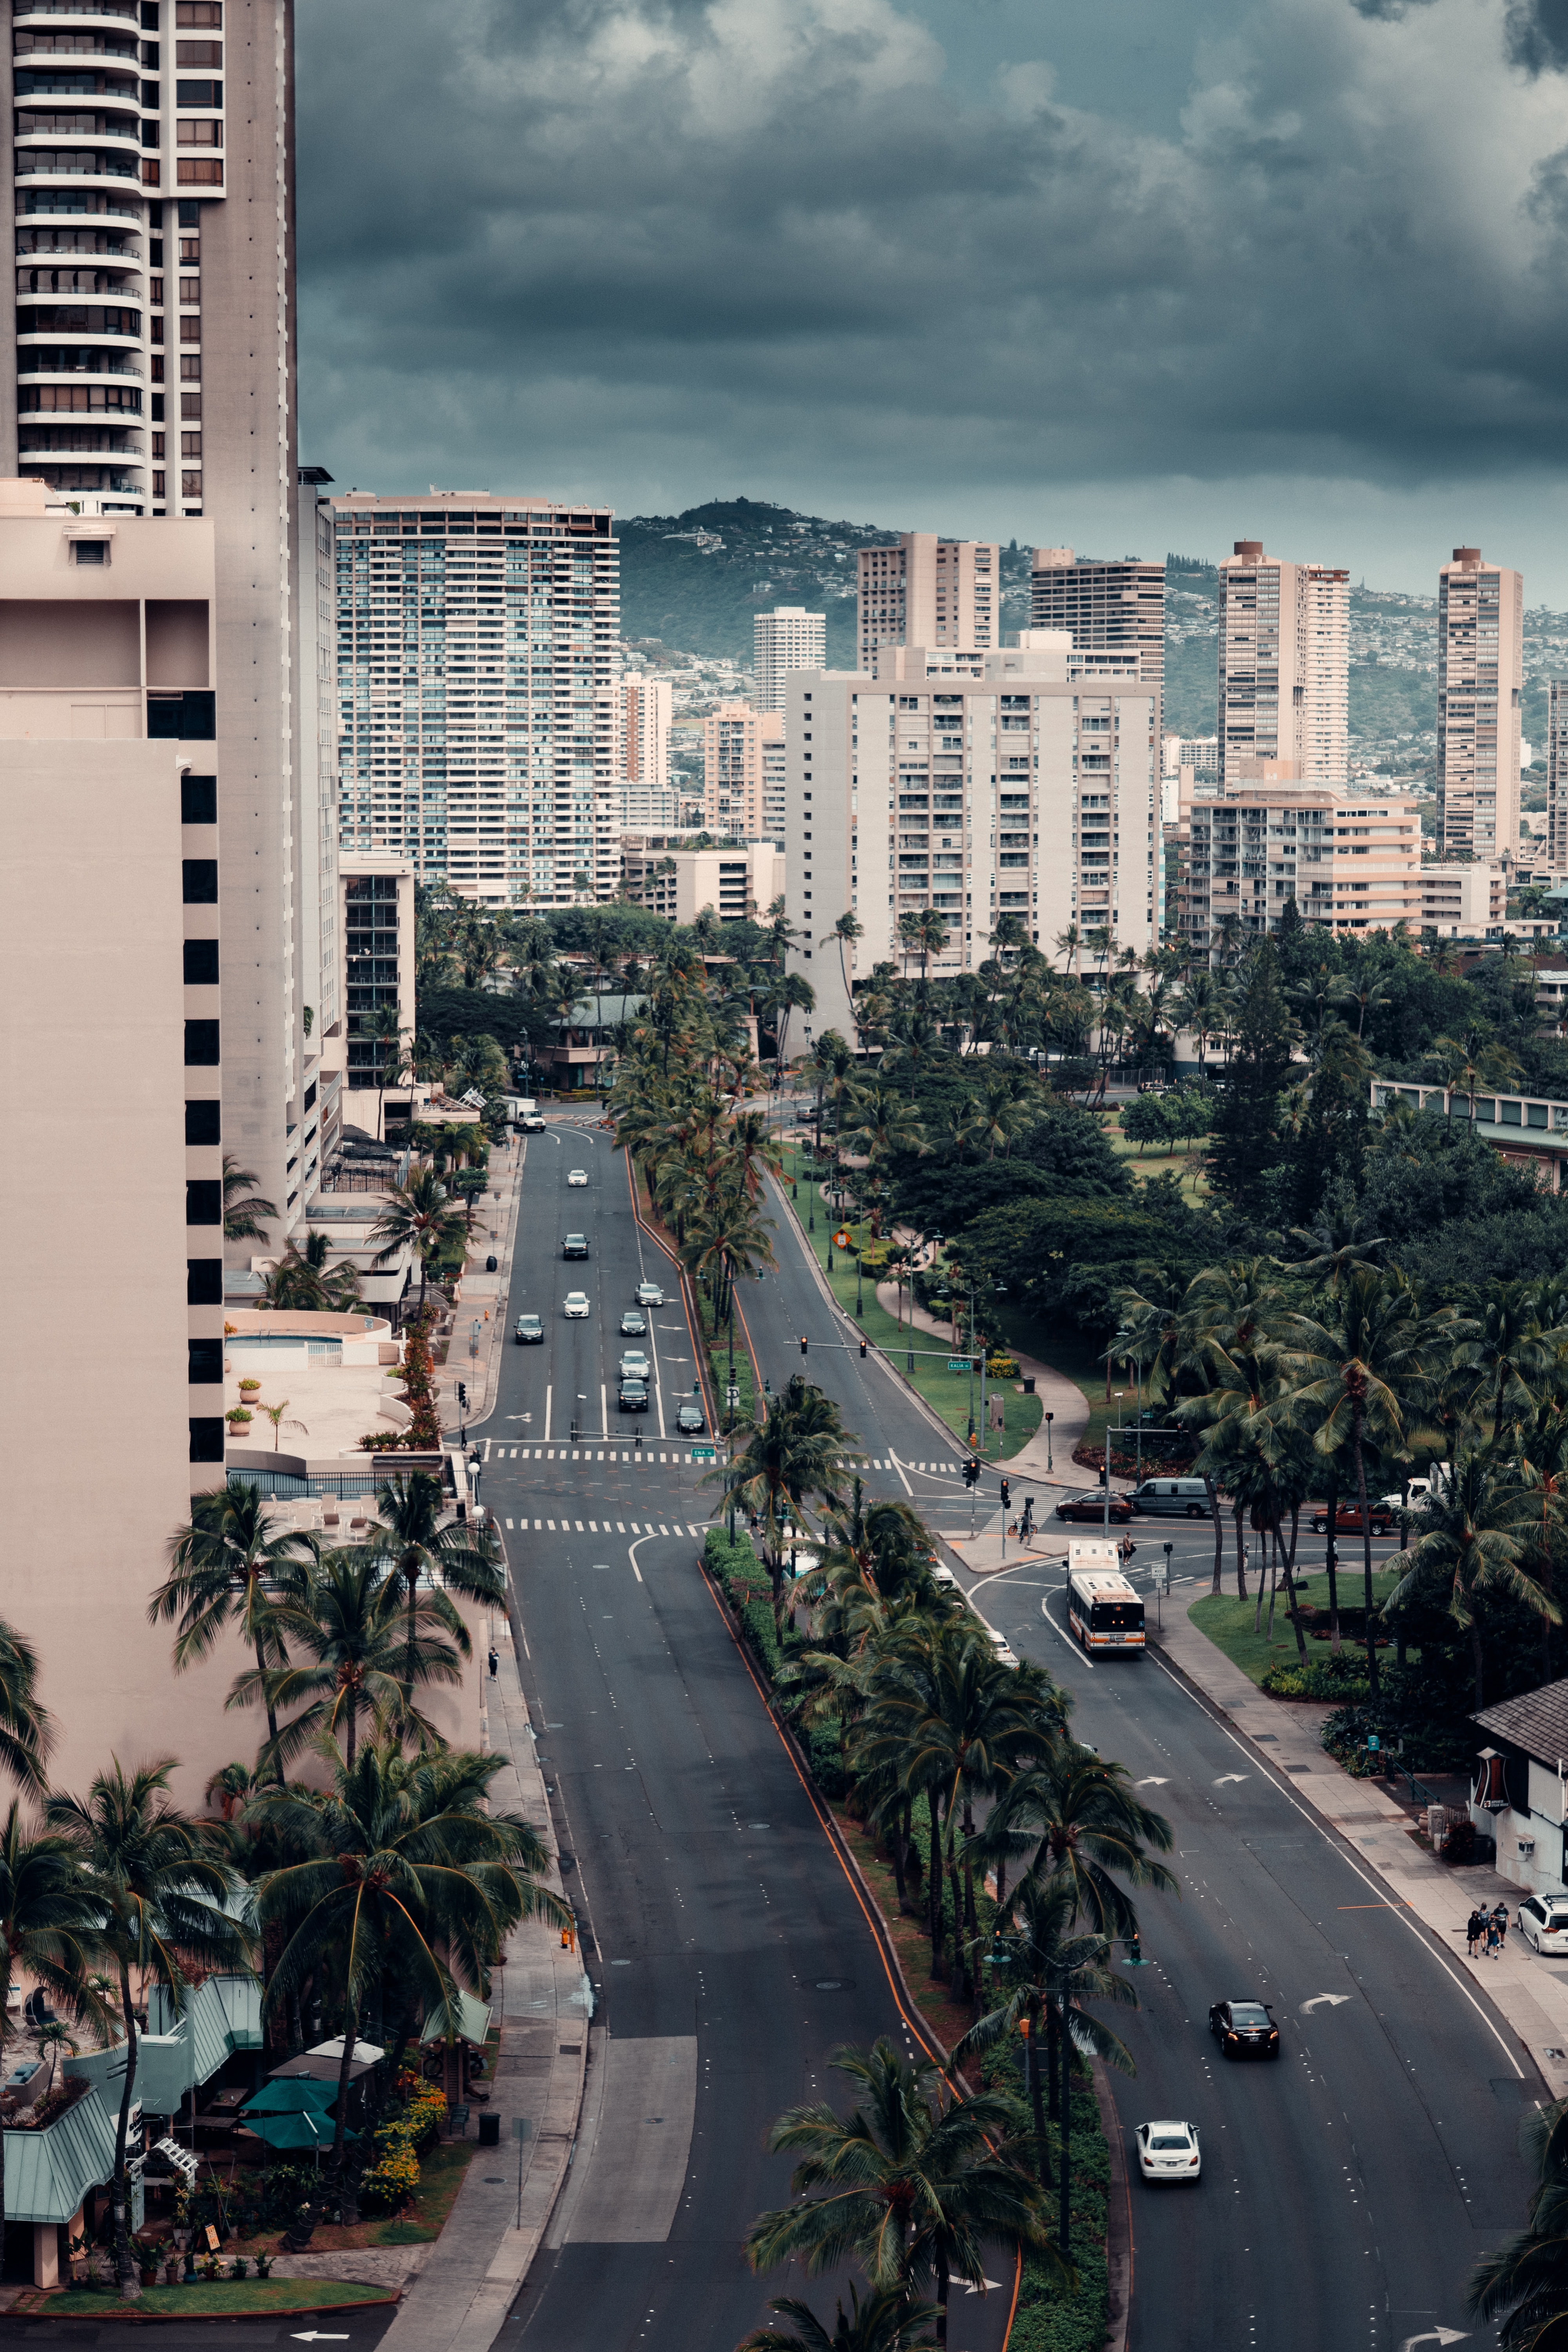 Wallpaper Full HD cities, palms, city, building, view from above, road